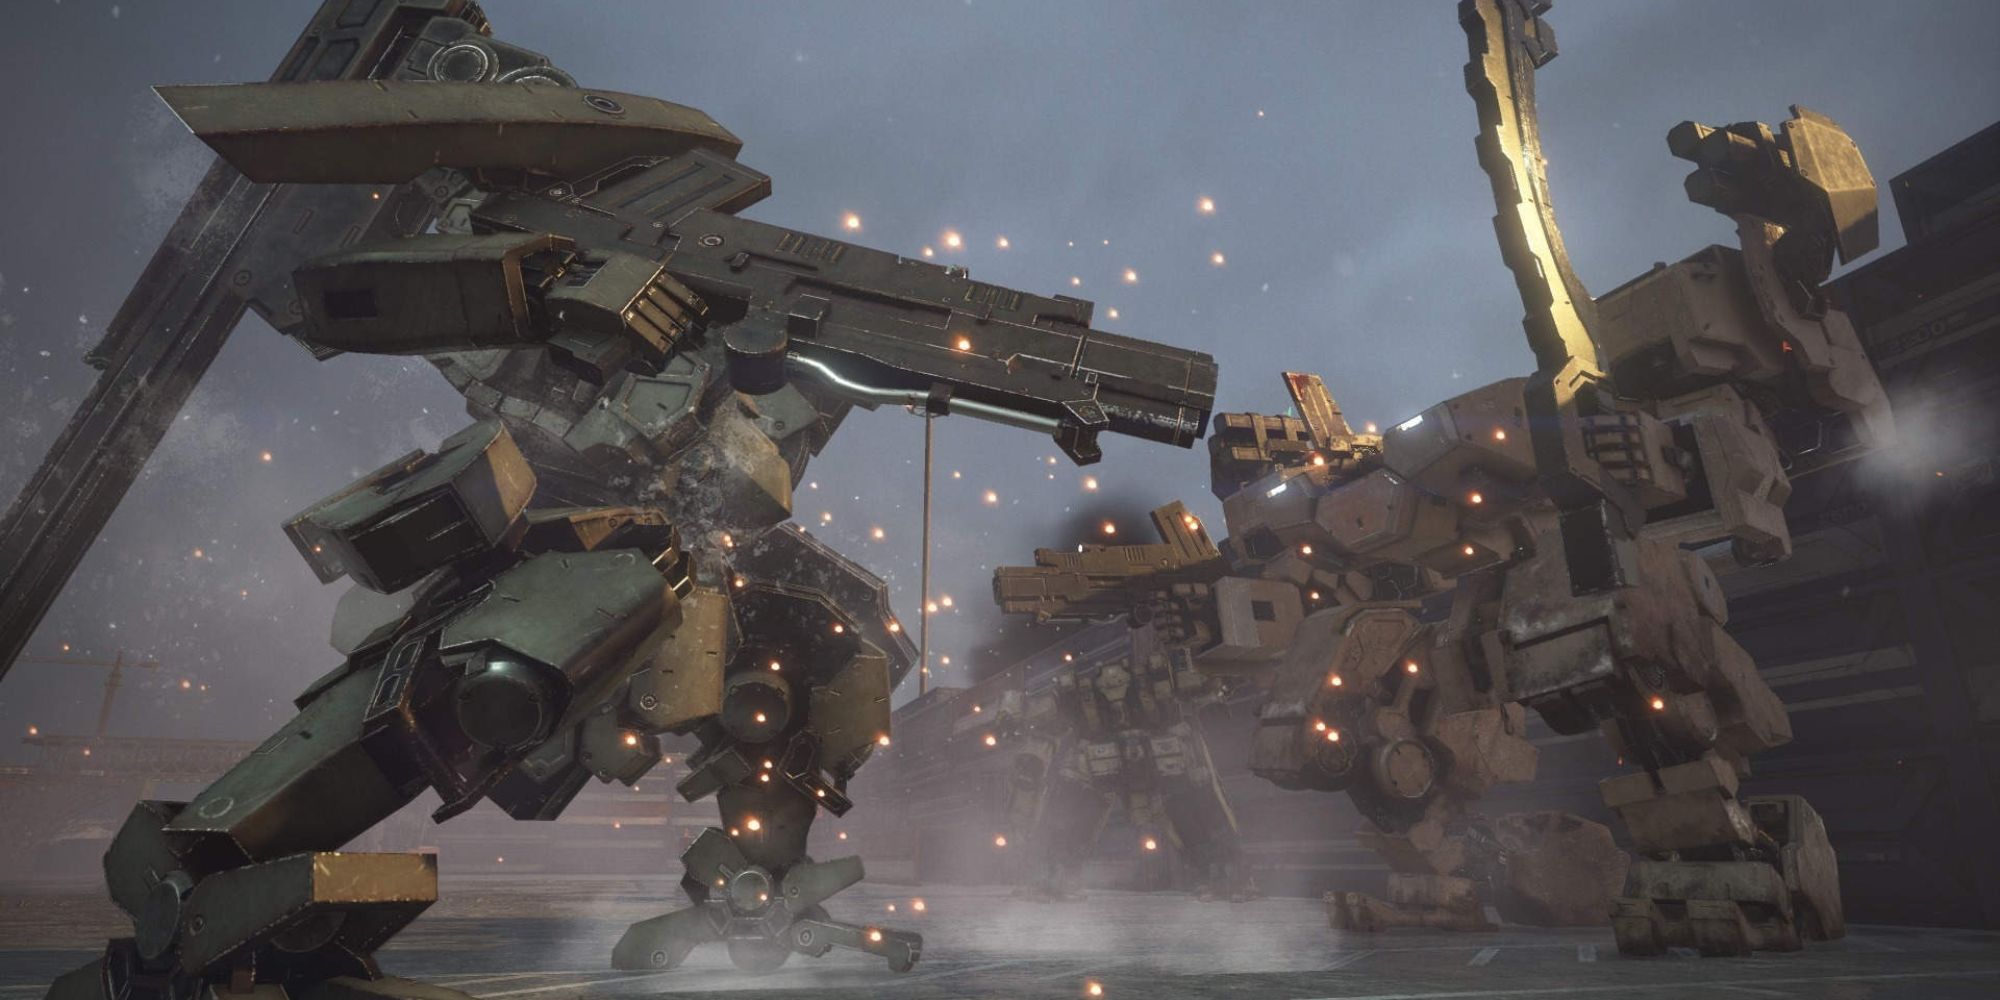 Best Vehicles two giant mechs from Left Alive fighting each other on an abandoned dock